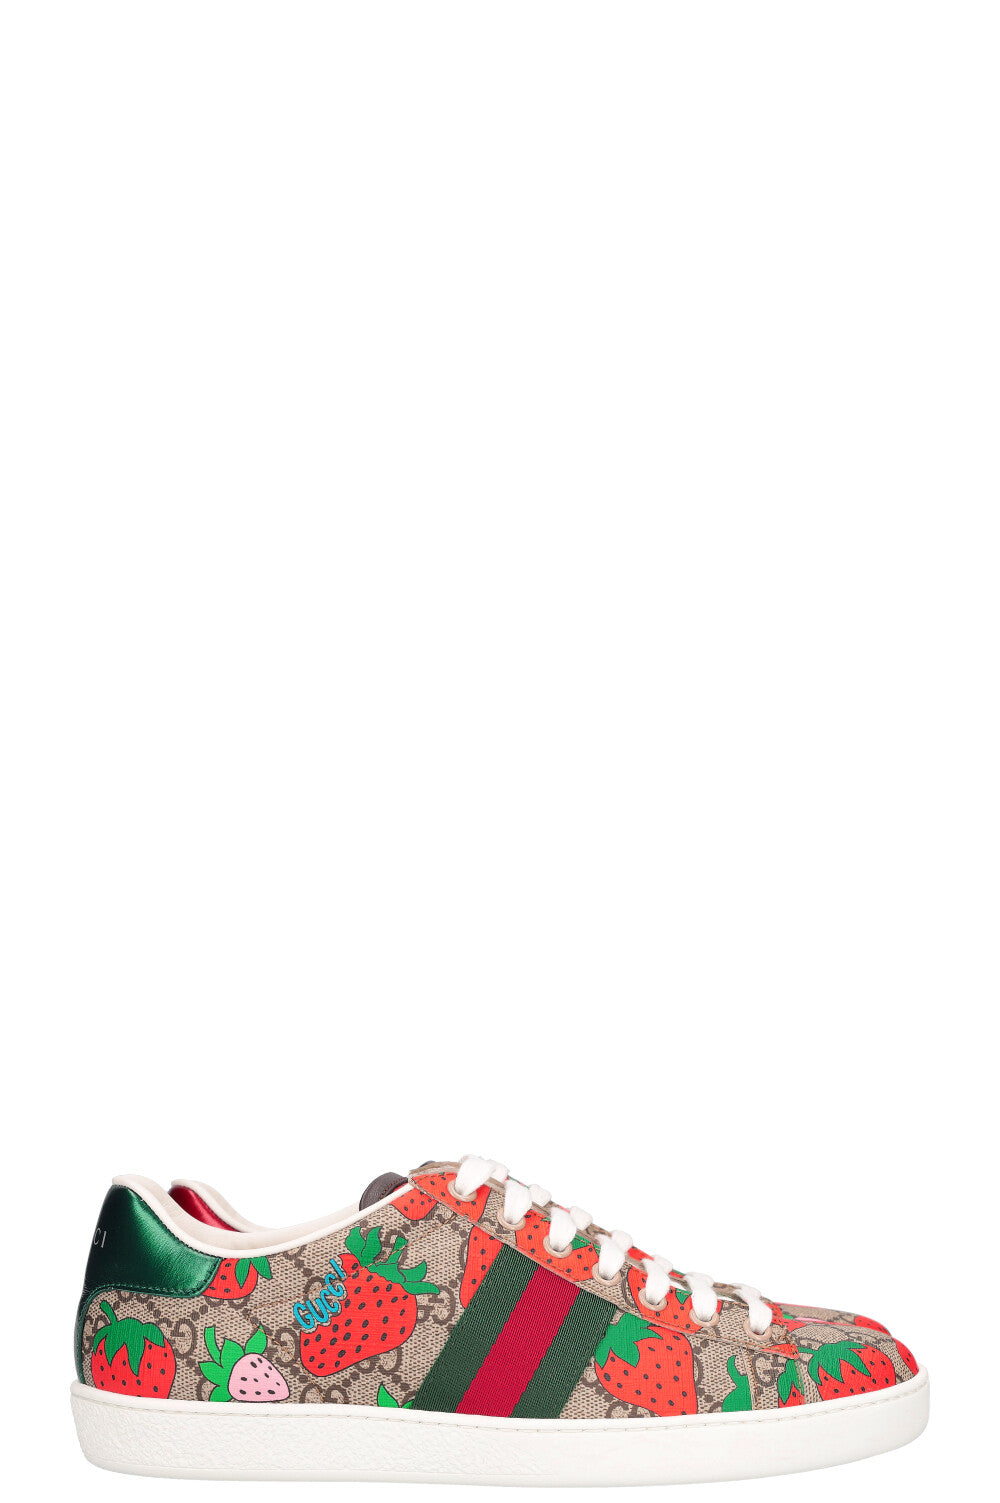 GUCCI Ace Sneakers Strawberries